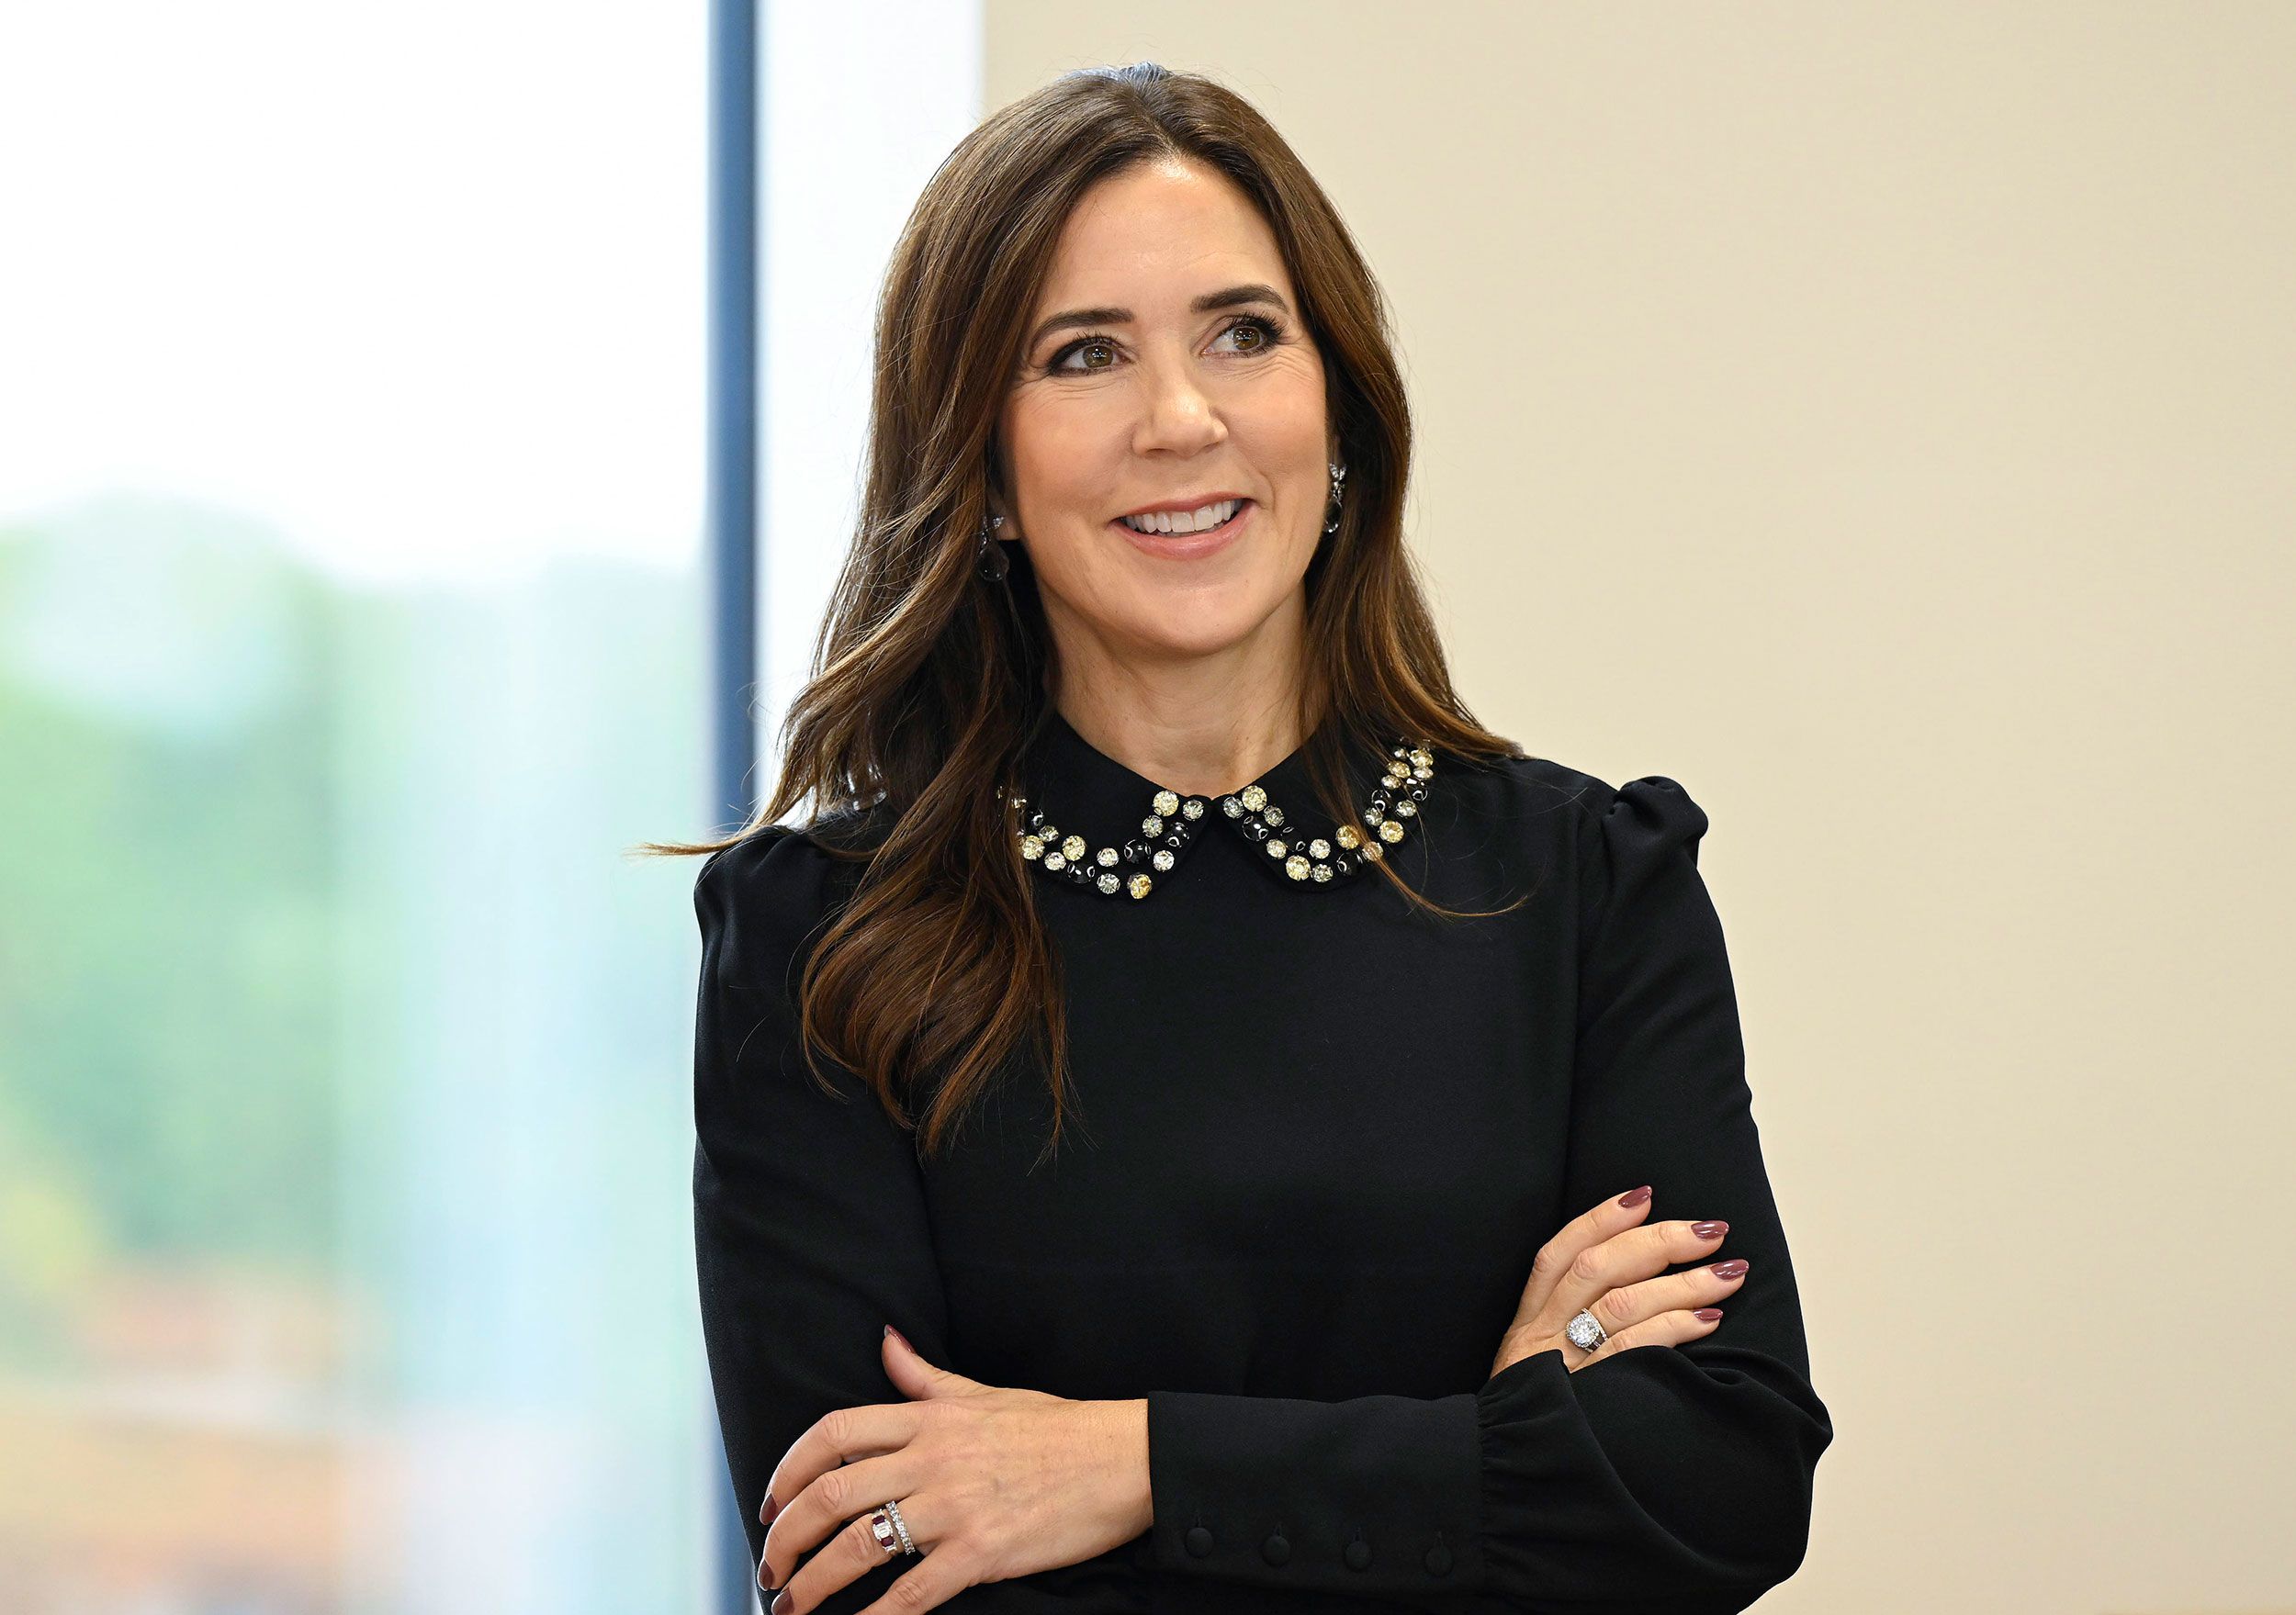 Crown Princess Mary Elizabeth: Why Denmark will give the world the